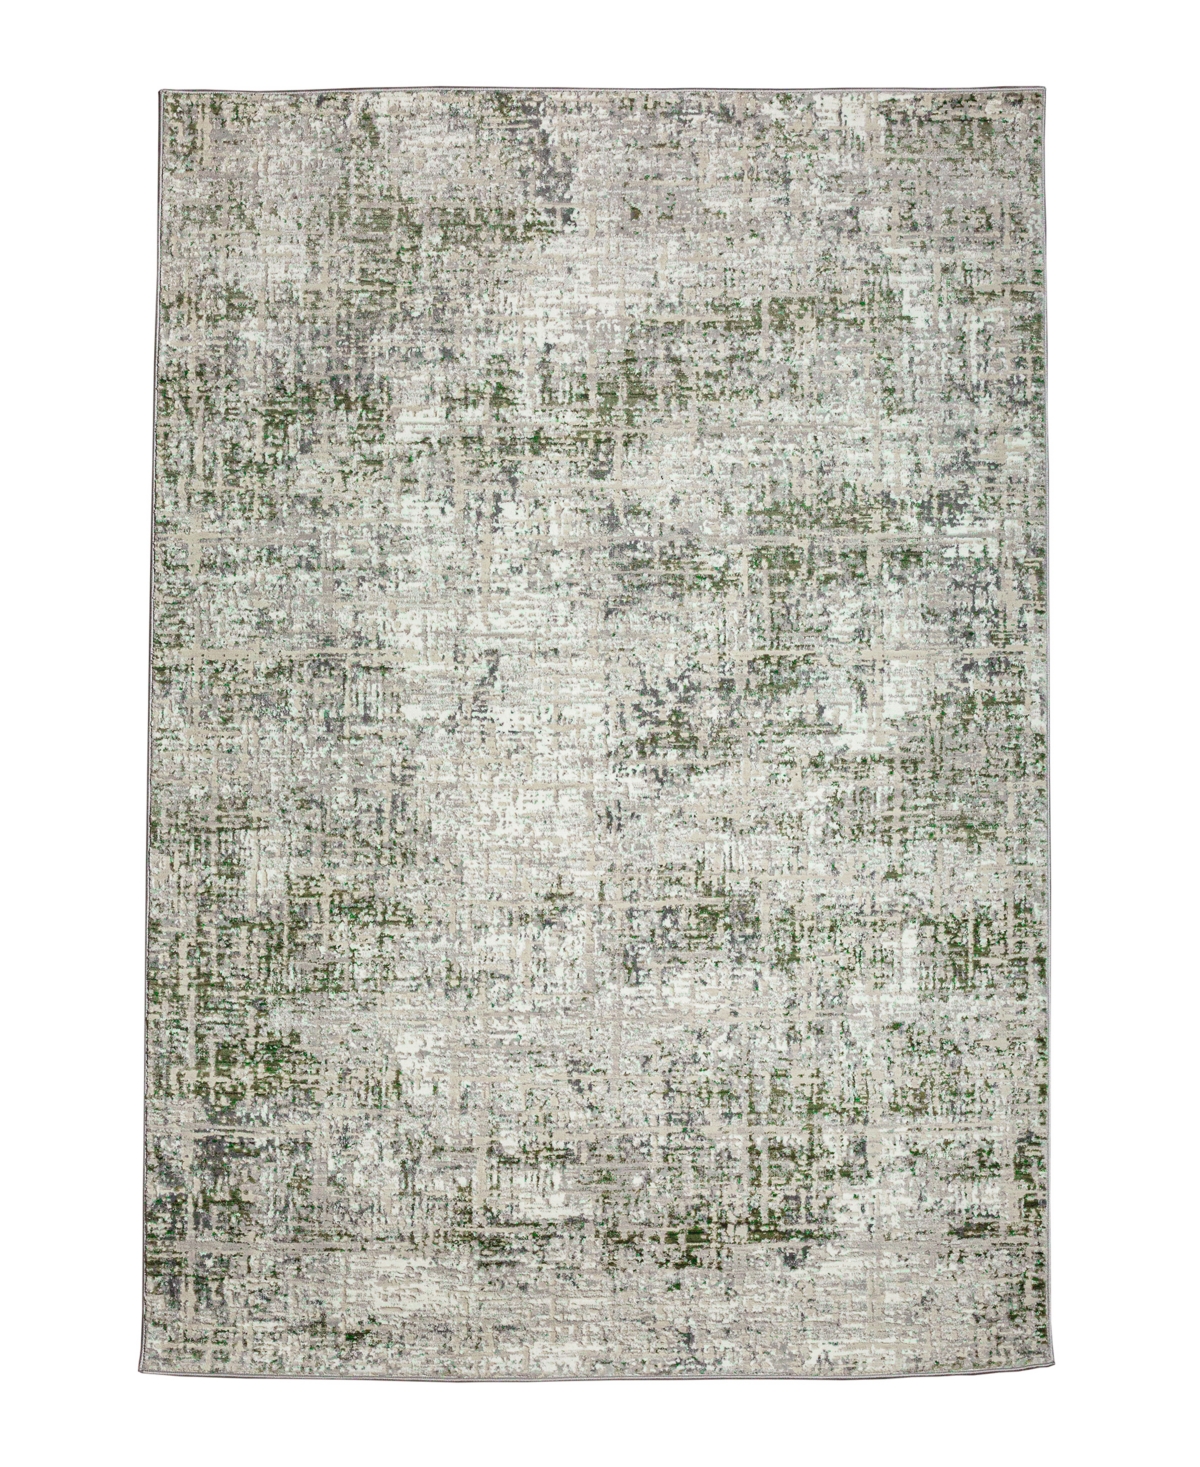 Km Home Teola 1241 5'3in x 7'3in Area Rug - Green